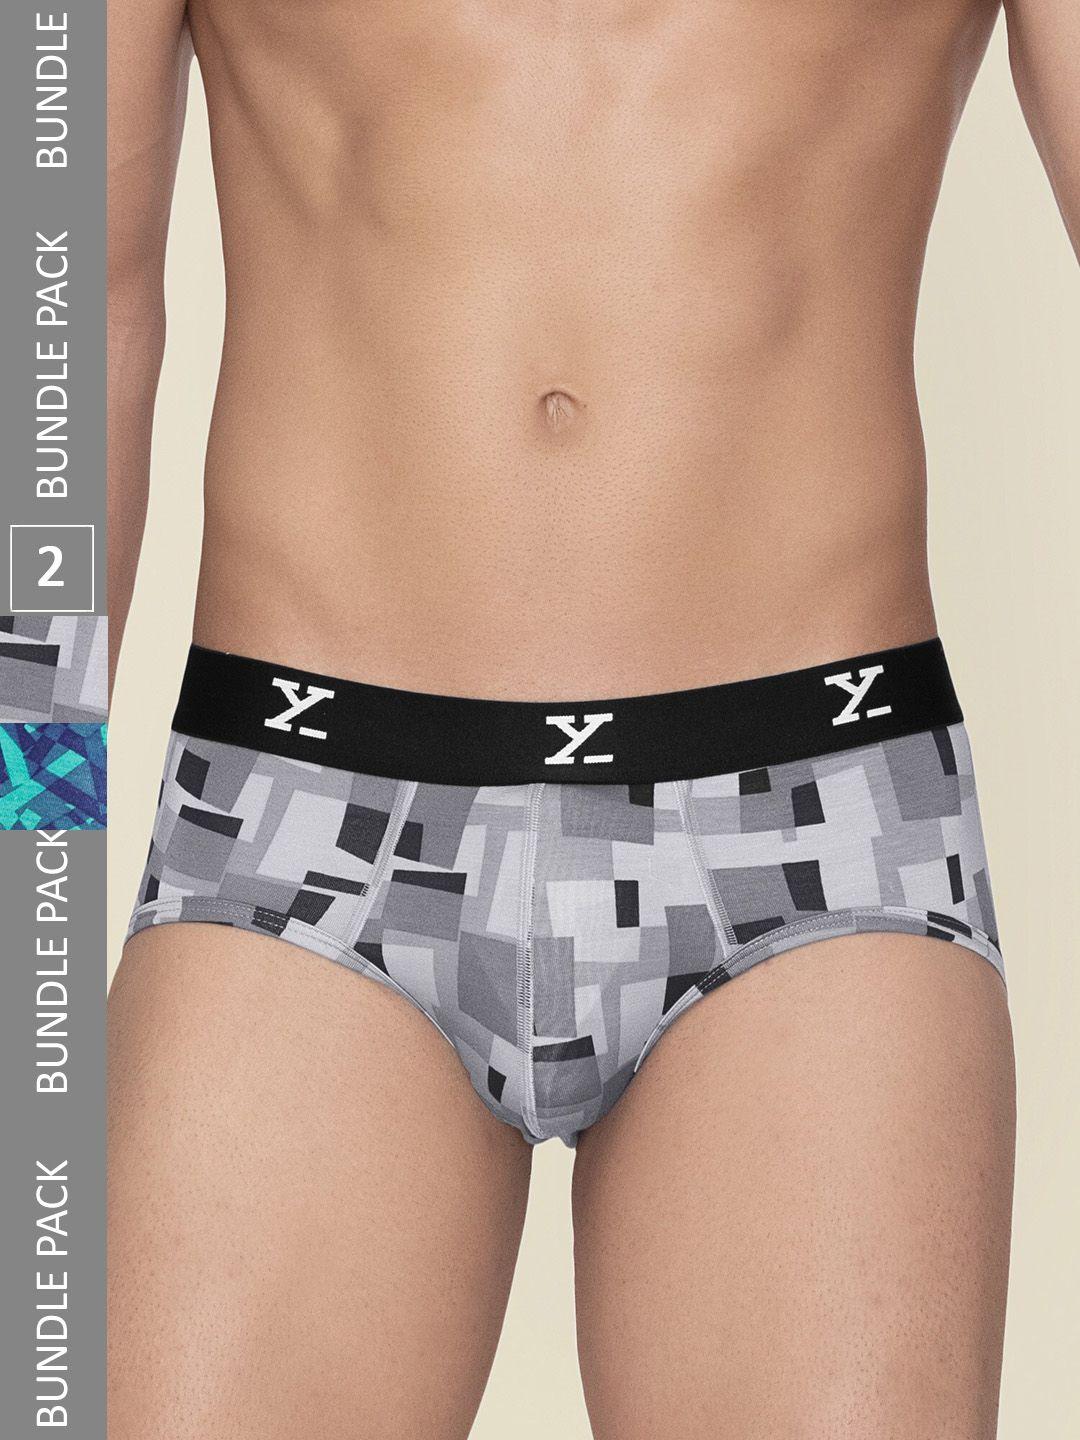 xyxx men pack of 2 striped printed anti-microbial basic briefs